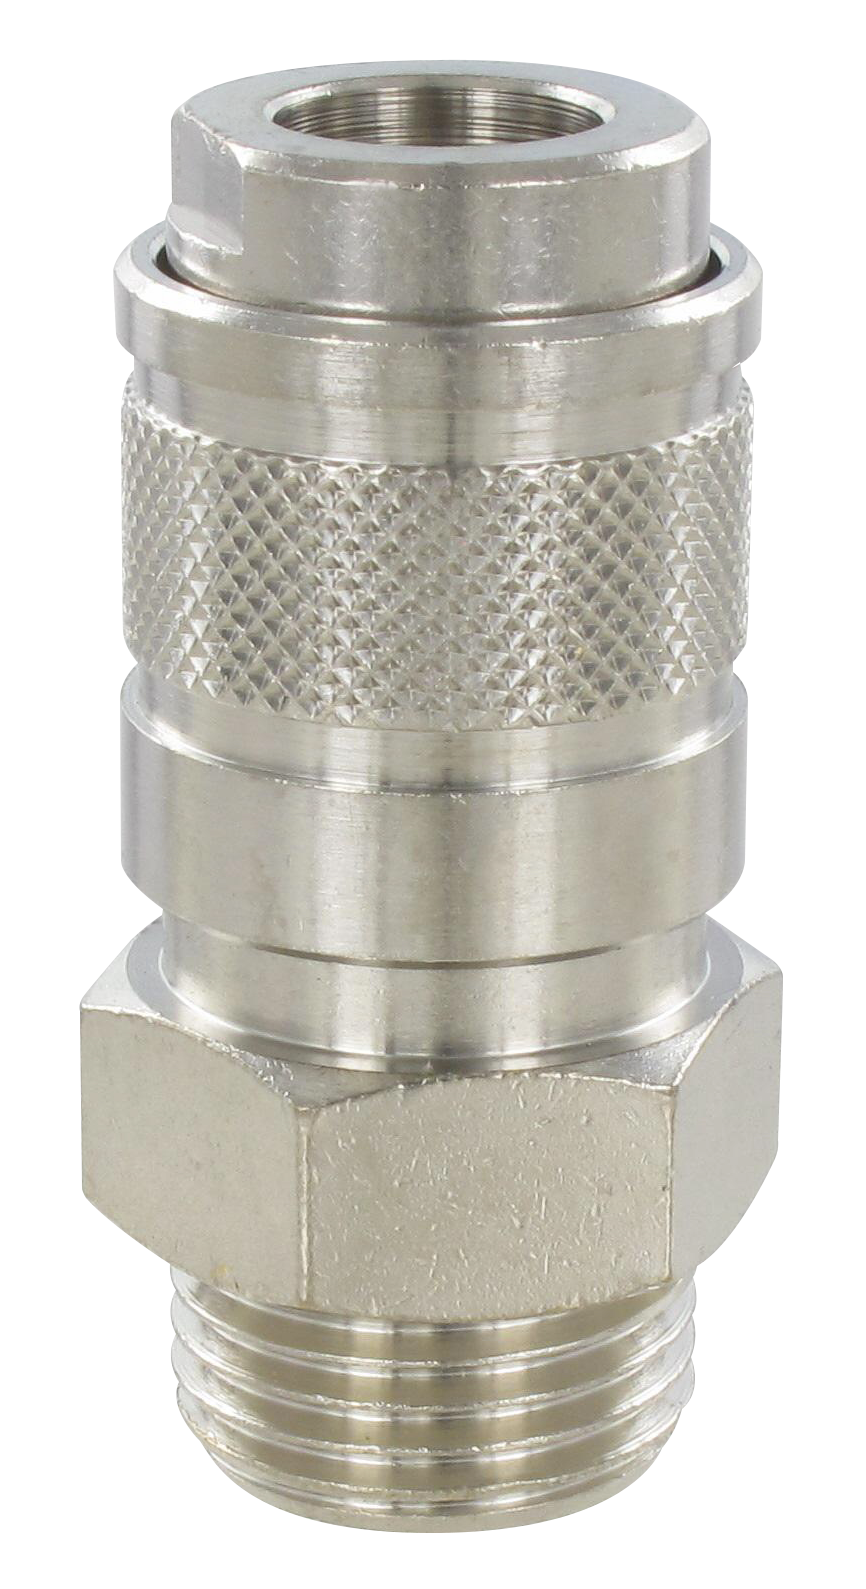 Quick-connect couplings, US-MIL standard ISO 6150 B-12 MALE SOCKET